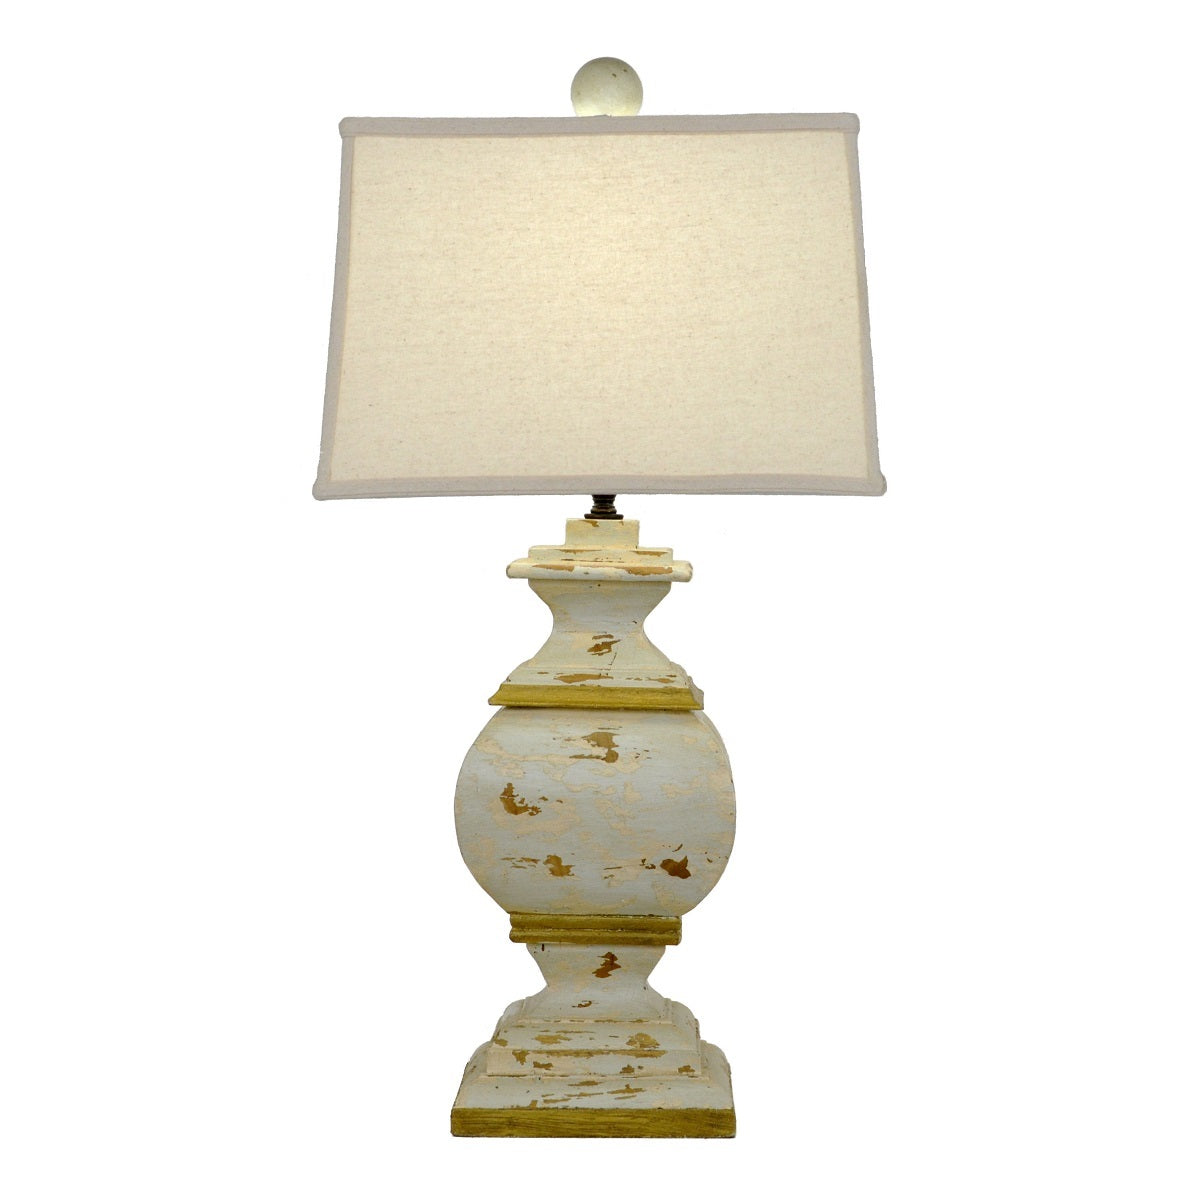 Layton Solid Wood Table Lamp - Lillian Home 